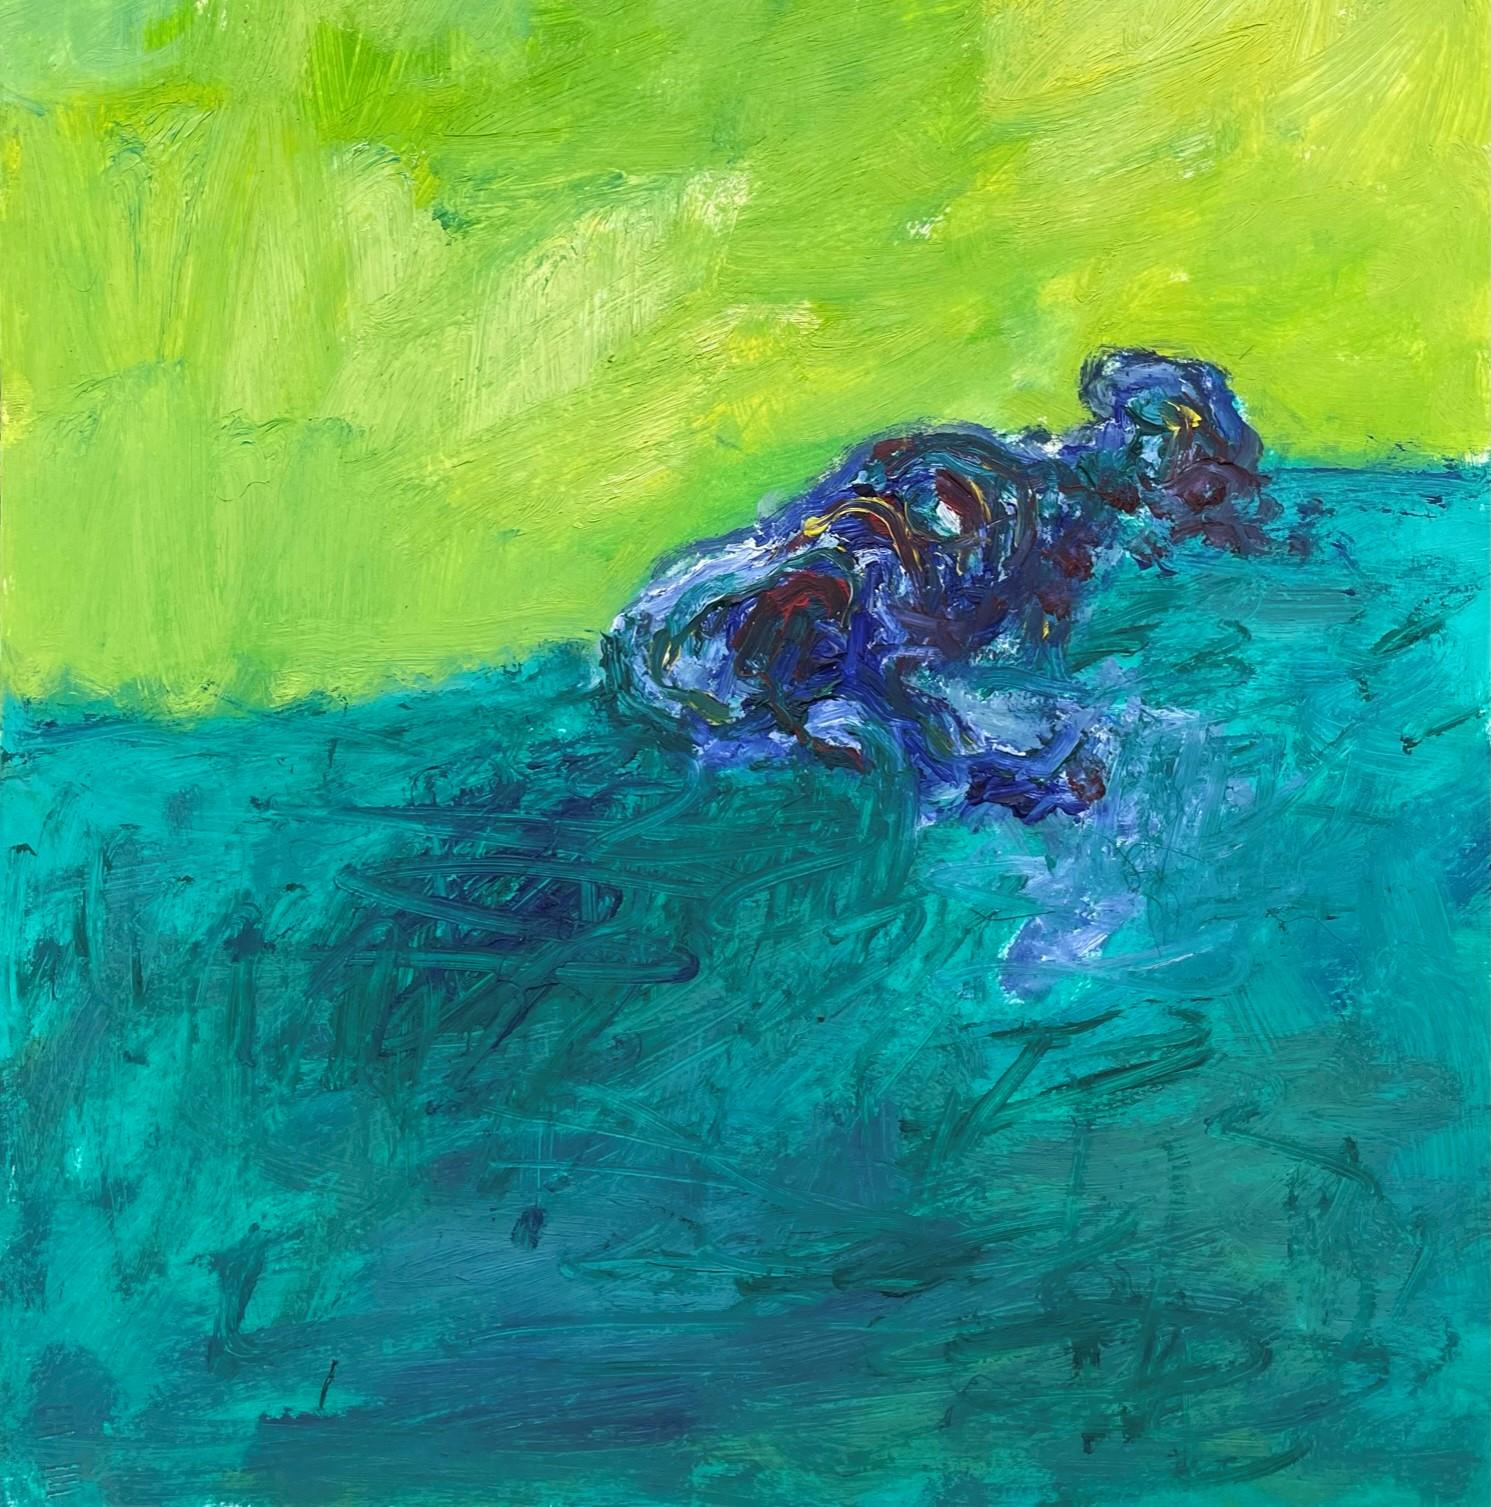 Remains (Body in the Field 13) - 21st Century, Green, Blue, Oil - Abstract Expressionist Art by Zsolt Berszán